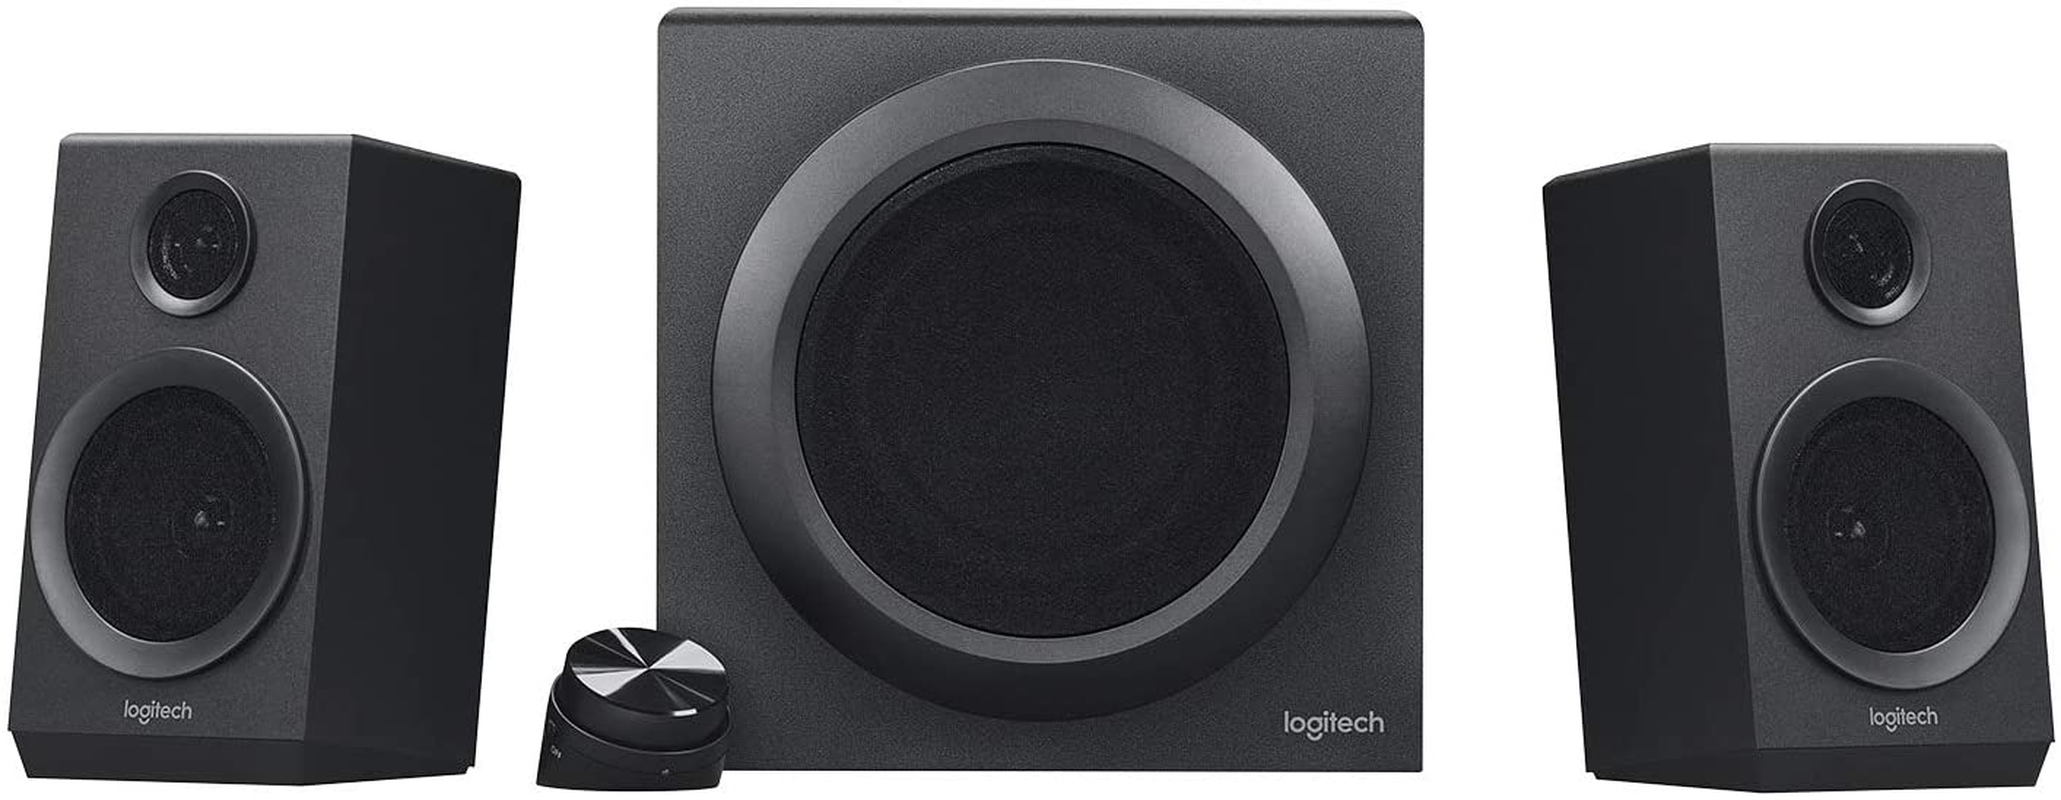 Logitech Z333 2.1 Speakers – Easy-Access Volume Control, Headphone Jack – PC, Mobile Device, TV, Dvd/Blueray Player, and Game Console Compatible